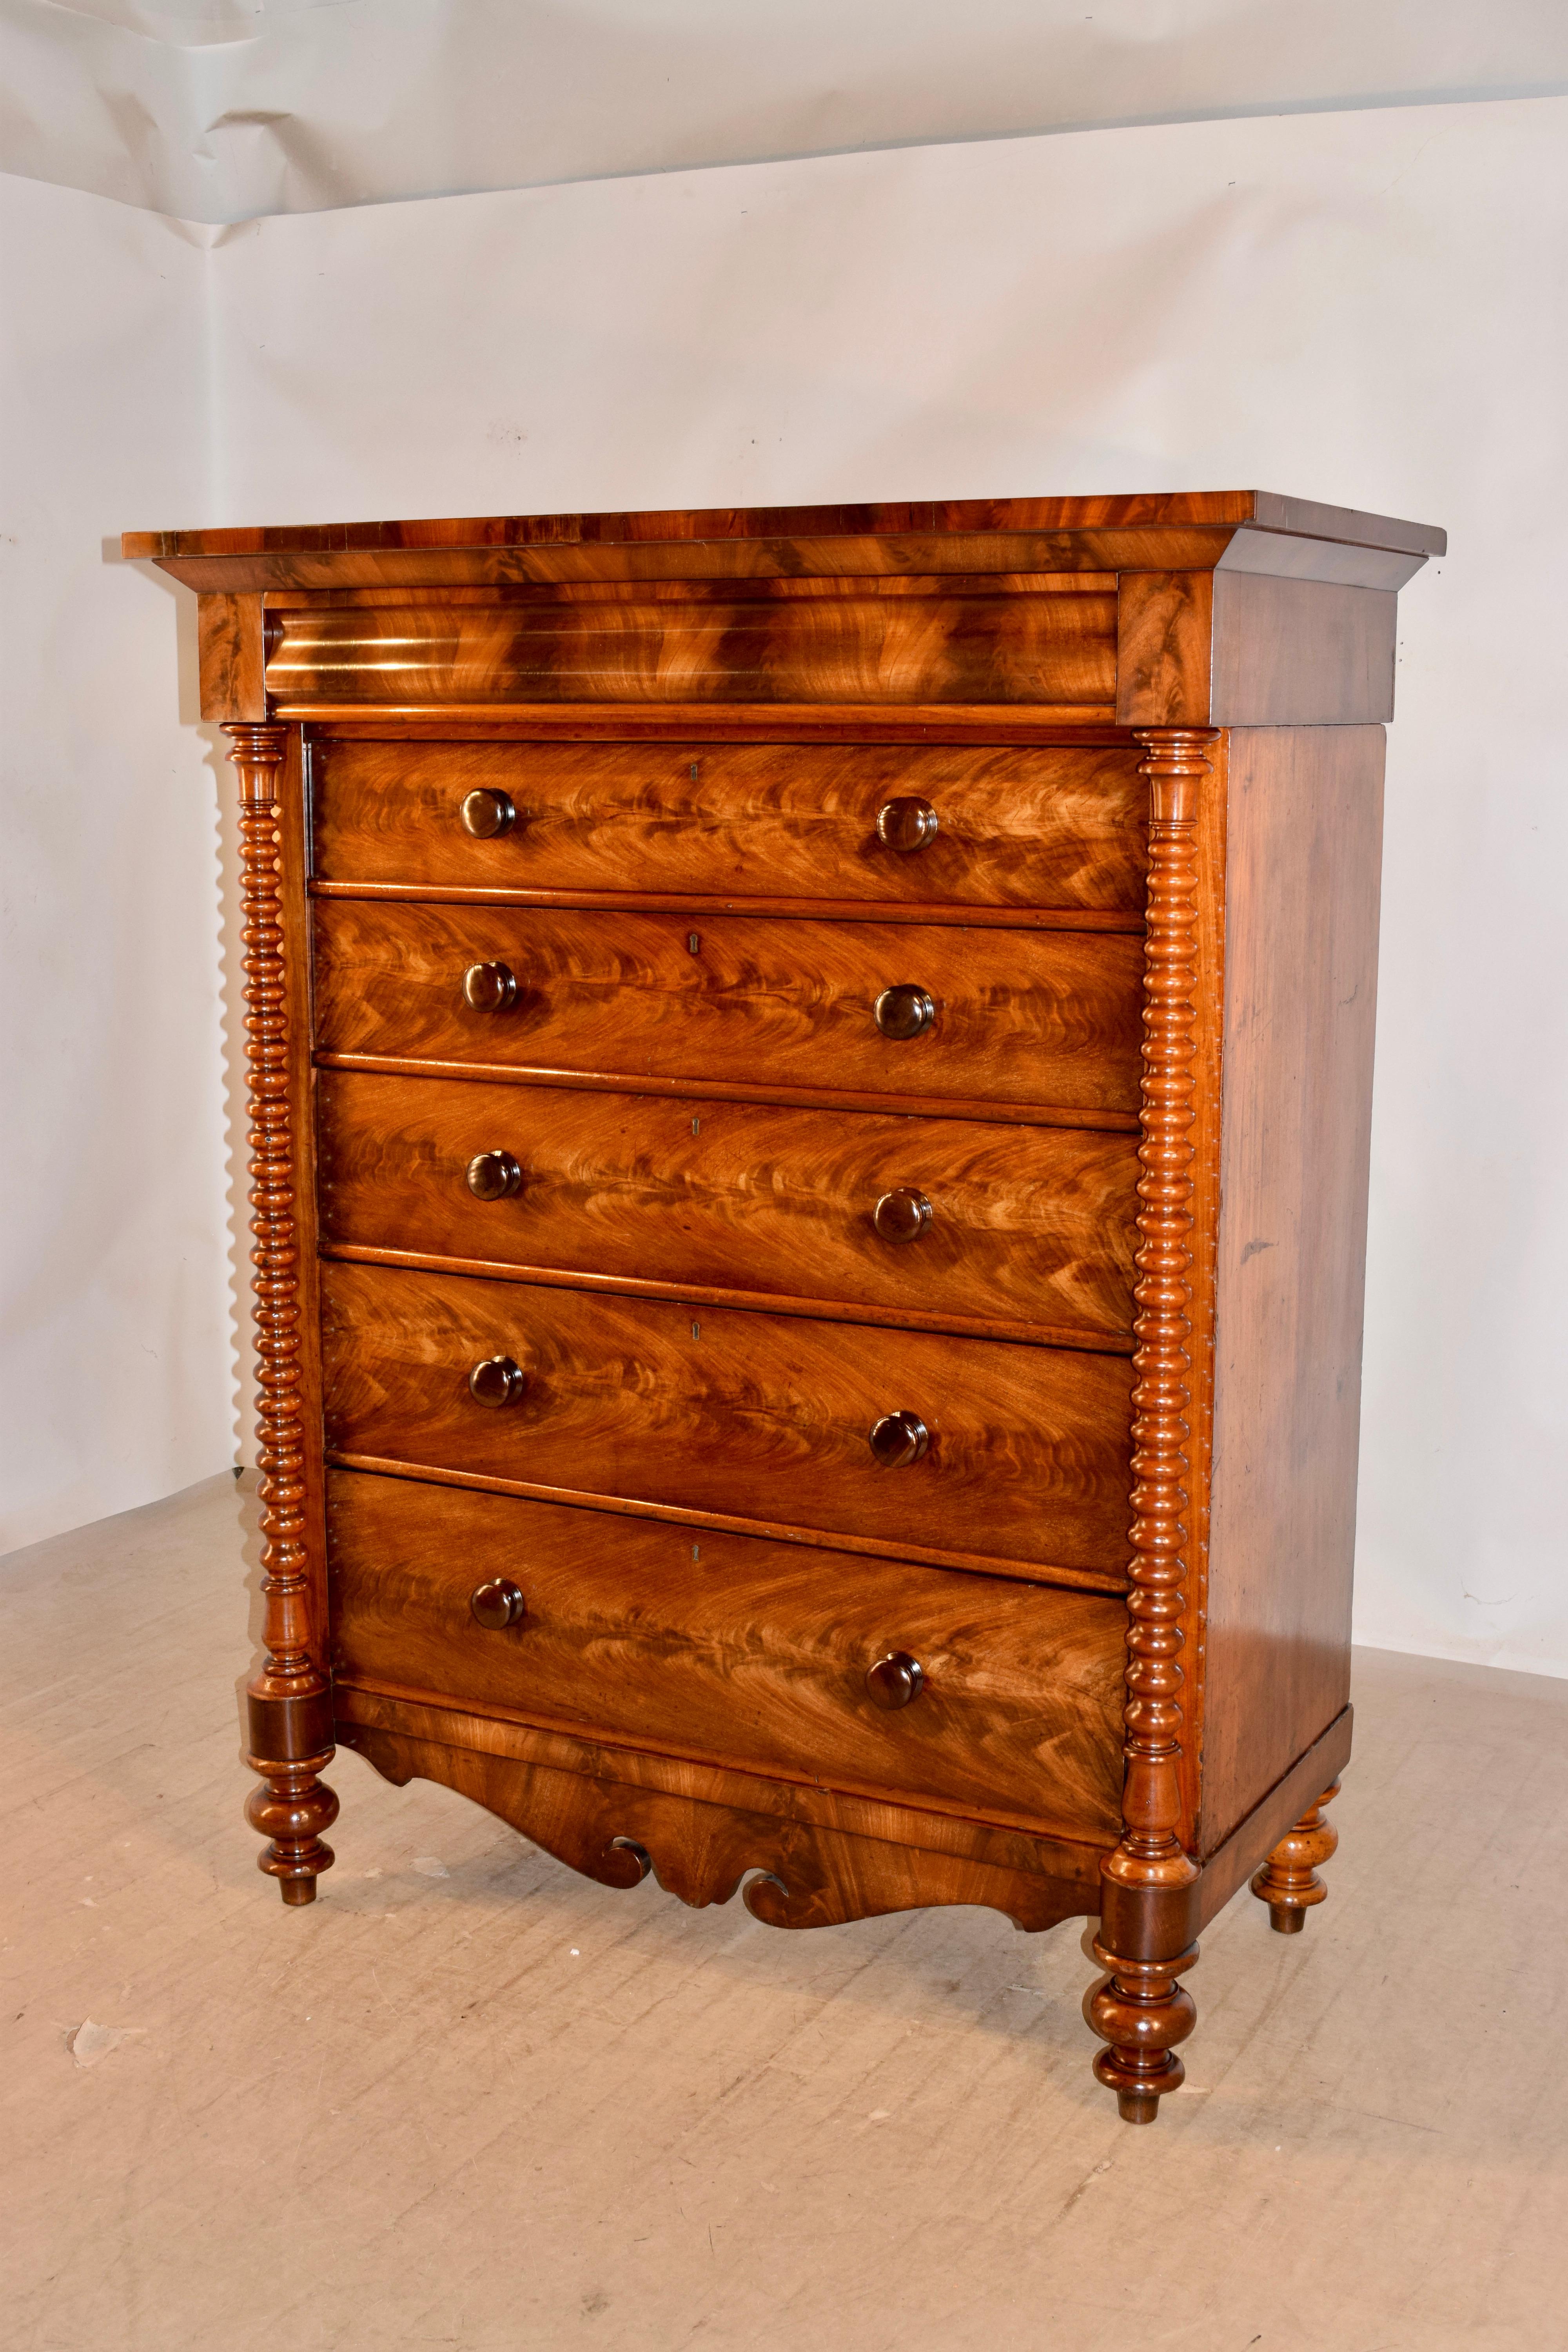 19th century tall flame mahogany chest from Scotland. The graining of the wood is breath-taking, and is a showpiece all in itself. The case has simple sides, and in the front, there is a molded hidden drawer at the top, over five drawers, all with